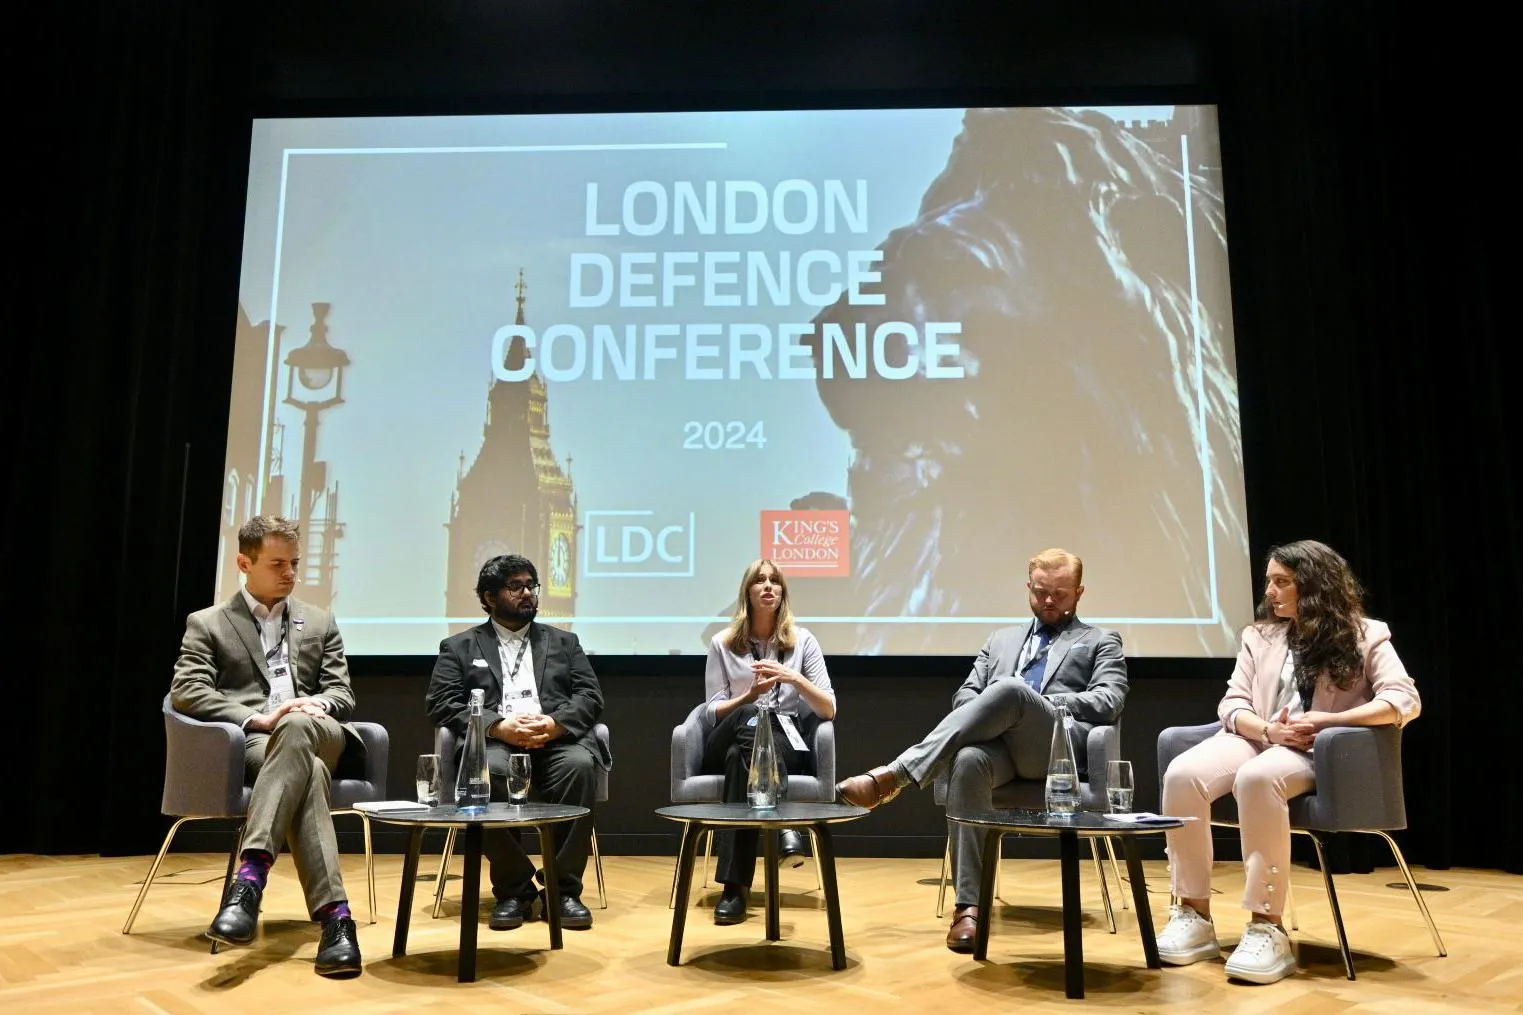 A panel discussion - a row of people seated in front of a large screen reading 'London Defence Conference 2024'